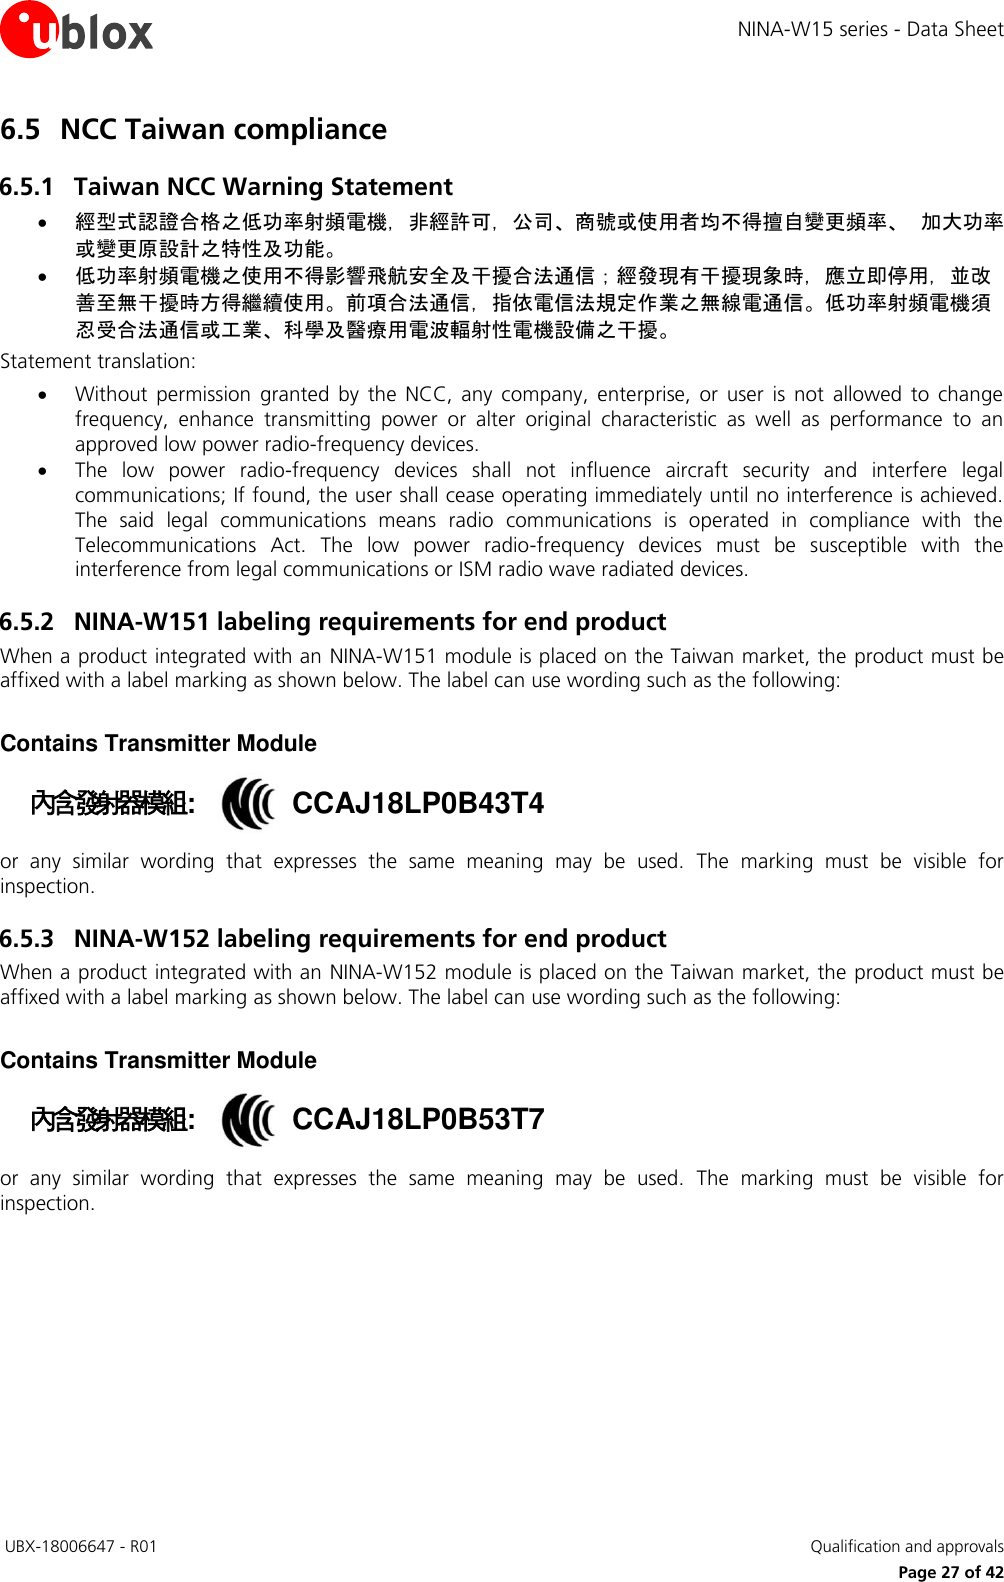 NINA-W15 series - Data Sheet  UBX-18006647 - R01   Qualification and approvals     Page 27 of 42 6.5 NCC Taiwan compliance 6.5.1 Taiwan NCC Warning Statement  經型式認證合格之低功率射頻電機，非經許可，公司、商號或使用者均不得擅自變更頻率、 加大功率或變更原設計之特性及功能。  低功率射頻電機之使用不得影響飛航安全及干擾合法通信；經發現有干擾現象時，應立即停用，並改善至無干擾時方得繼續使用。前項合法通信，指依電信法規定作業之無線電通信。低功率射頻電機須忍受合法通信或工業、科學及醫療用電波輻射性電機設備之干擾。 Statement translation:    Without  permission  granted  by  the  NCC,  any  company,  enterprise,  or  user  is  not  allowed  to  change frequency,  enhance  transmitting  power  or  alter  original  characteristic  as  well  as  performance  to  an approved low power radio-frequency devices.  The  low  power  radio-frequency  devices  shall  not  influence  aircraft  security  and  interfere  legal communications; If found, the user shall cease operating immediately until no interference is achieved. The  said  legal  communications  means  radio  communications  is  operated  in  compliance  with  the Telecommunications  Act.  The  low  power  radio-frequency  devices  must  be  susceptible  with  the interference from legal communications or ISM radio wave radiated devices. 6.5.2 NINA-W151 labeling requirements for end product When a product integrated with an NINA-W151 module is placed on the Taiwan market, the product must be affixed with a label marking as shown below. The label can use wording such as the following:   Contains Transmitter Module 內含發射器模組::  CCAJ18LP0B43T4 or  any  similar  wording  that  expresses  the  same  meaning  may  be  used.  The  marking  must  be  visible  for inspection. 6.5.3 NINA-W152 labeling requirements for end product When a product integrated with an NINA-W152 module is placed on the Taiwan market, the product must be affixed with a label marking as shown below. The label can use wording such as the following:   Contains Transmitter Module 內含發射器模組::  CCAJ18LP0B53T7 or  any  similar  wording  that  expresses  the  same  meaning  may  be  used.  The  marking  must  be  visible  for inspection.   